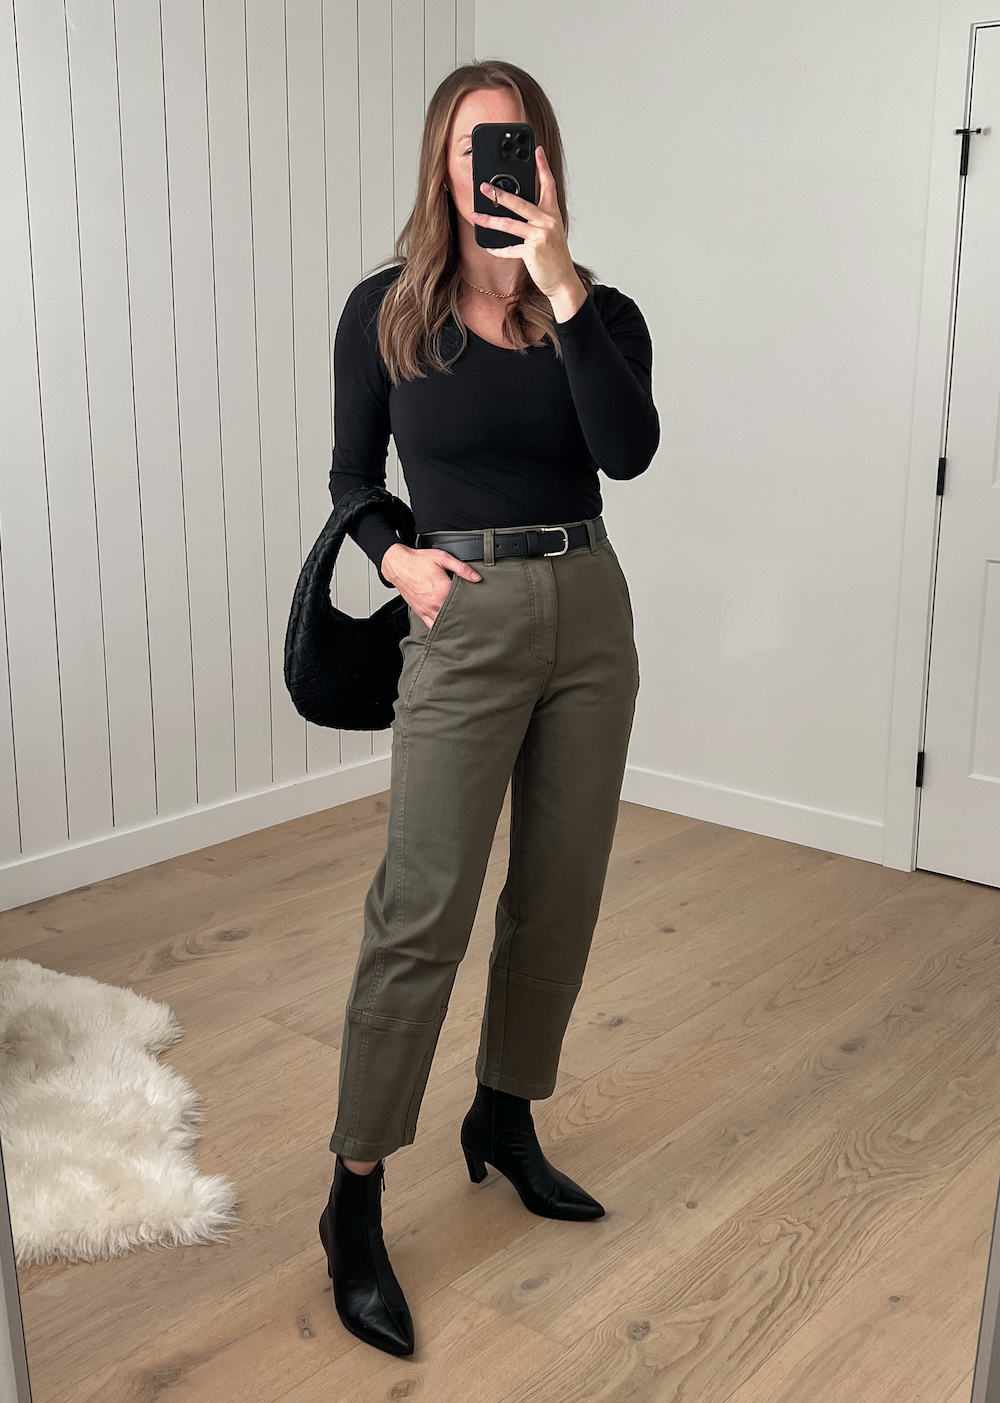 Christal wearing a black long sleeve top with olive green pants and black heeled boots